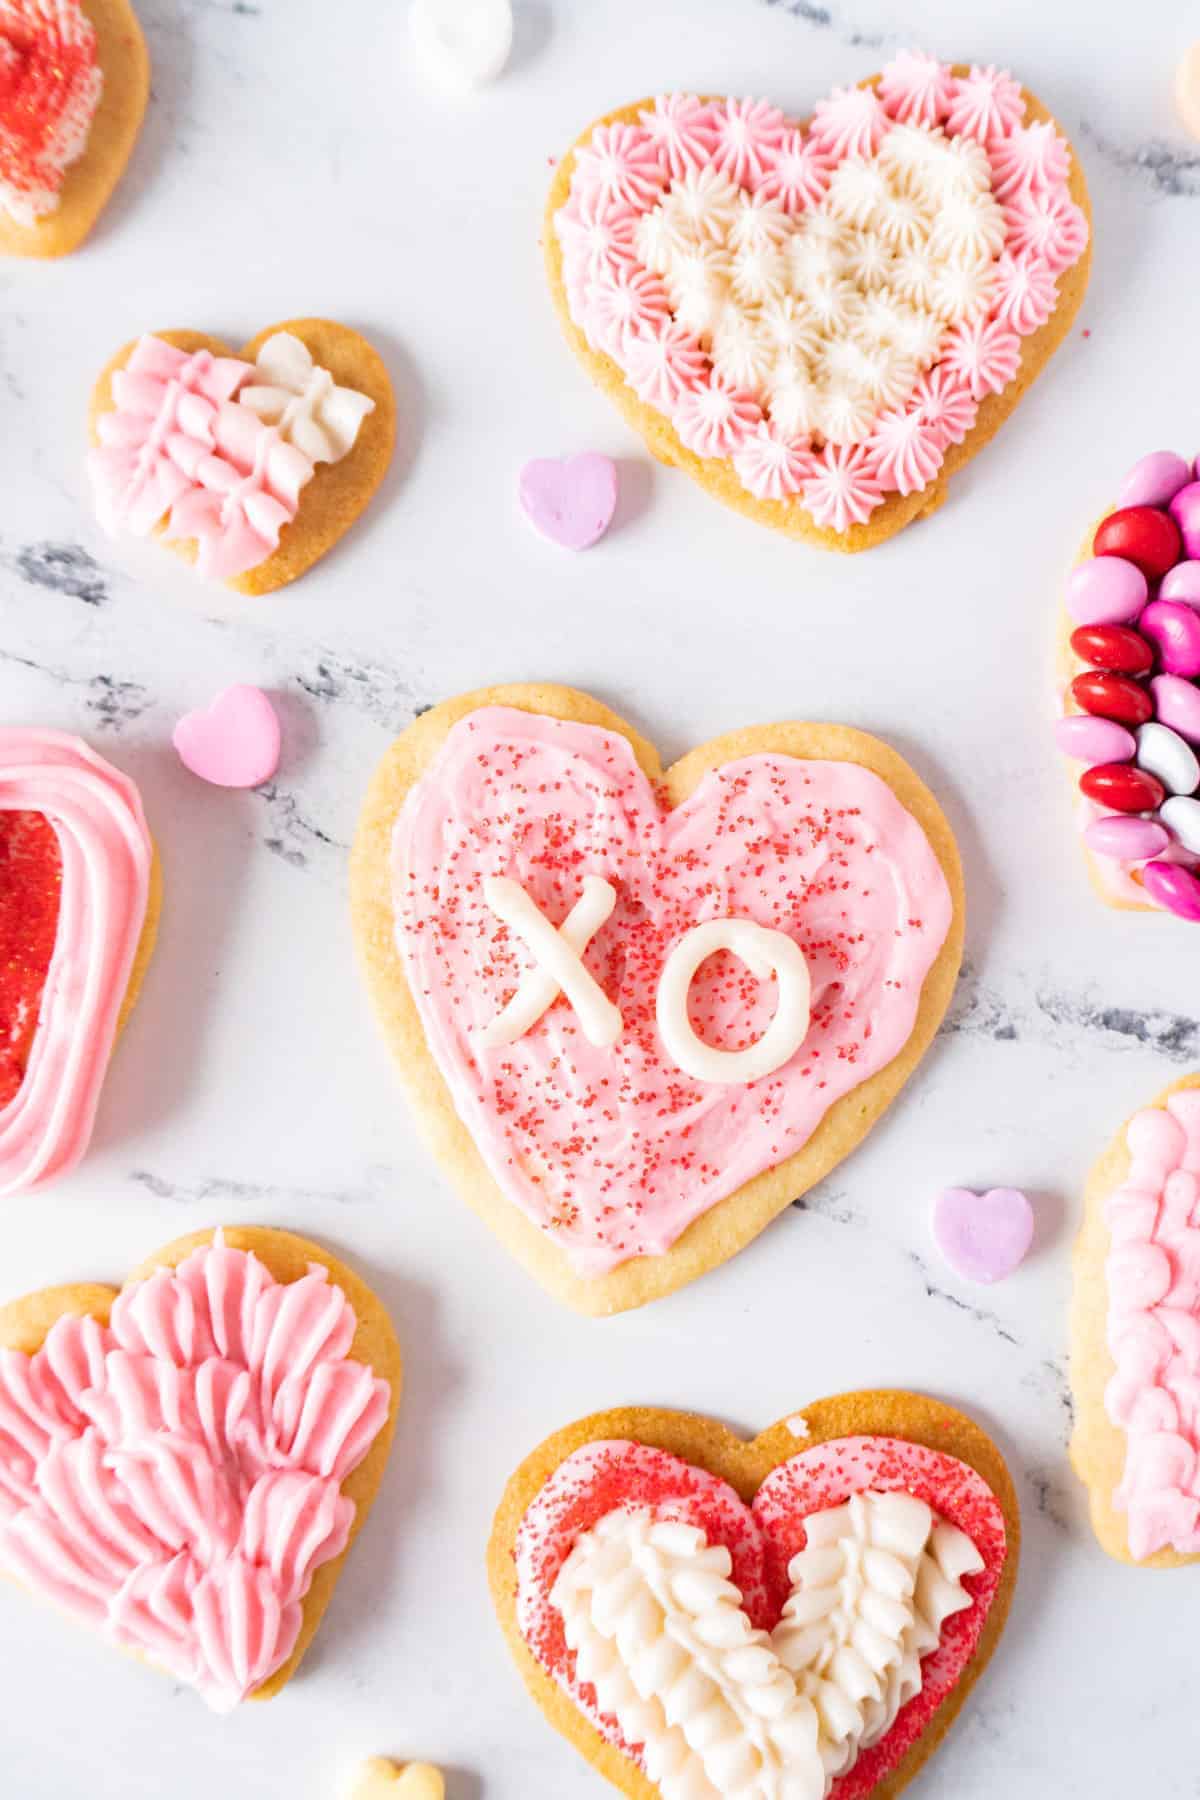 Heart cookies with icing decorations.